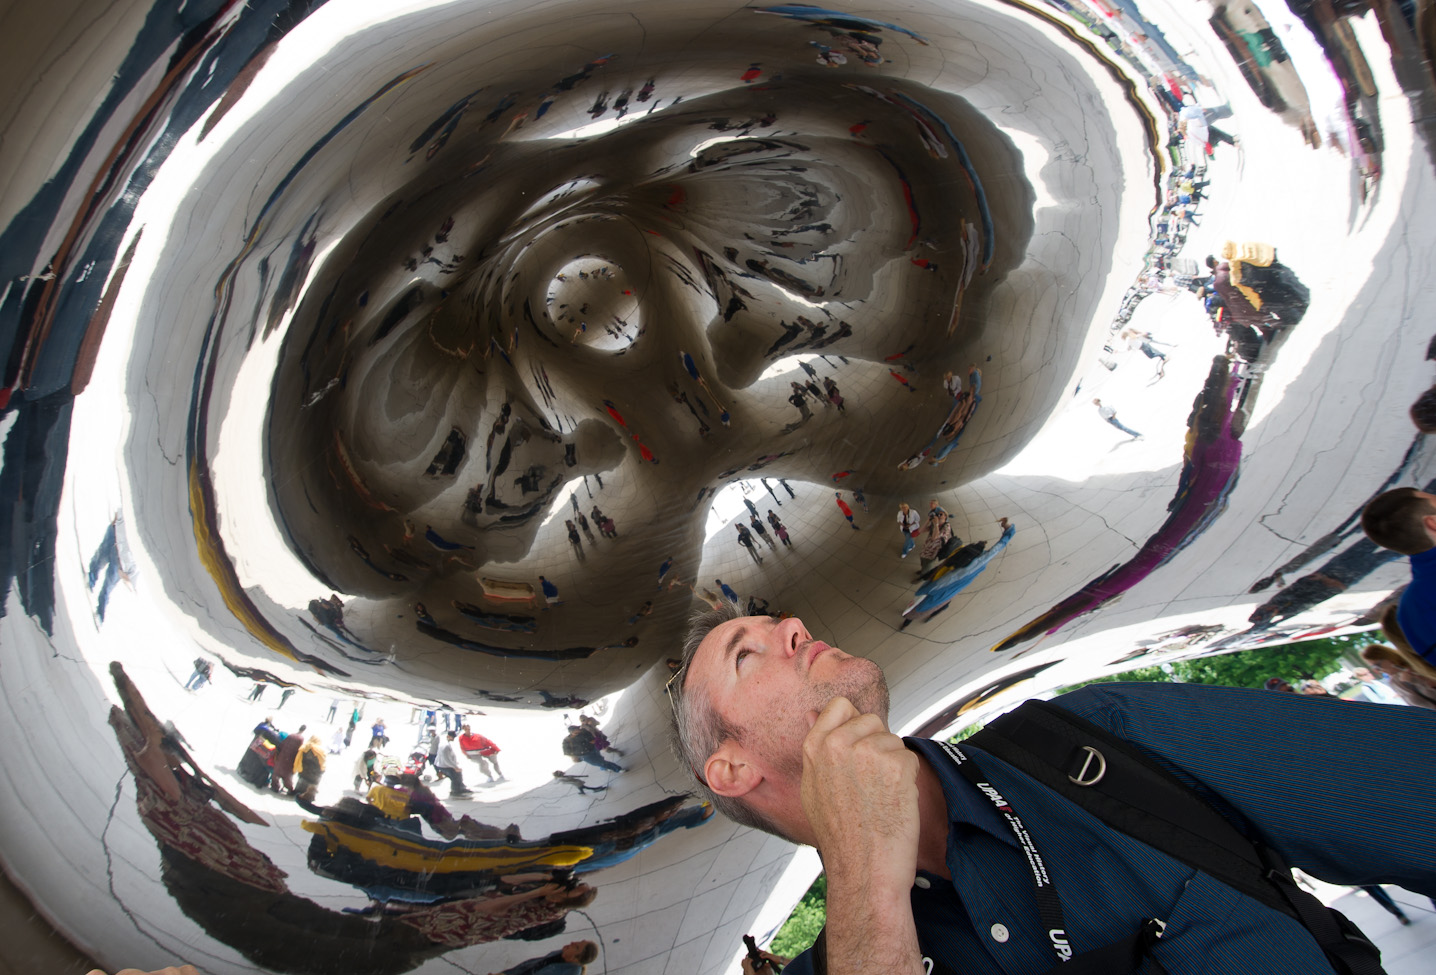 Robbie Rogers of Baylor grabbed my camera and took this photo of me underneath the famous "Bean" sculpture.